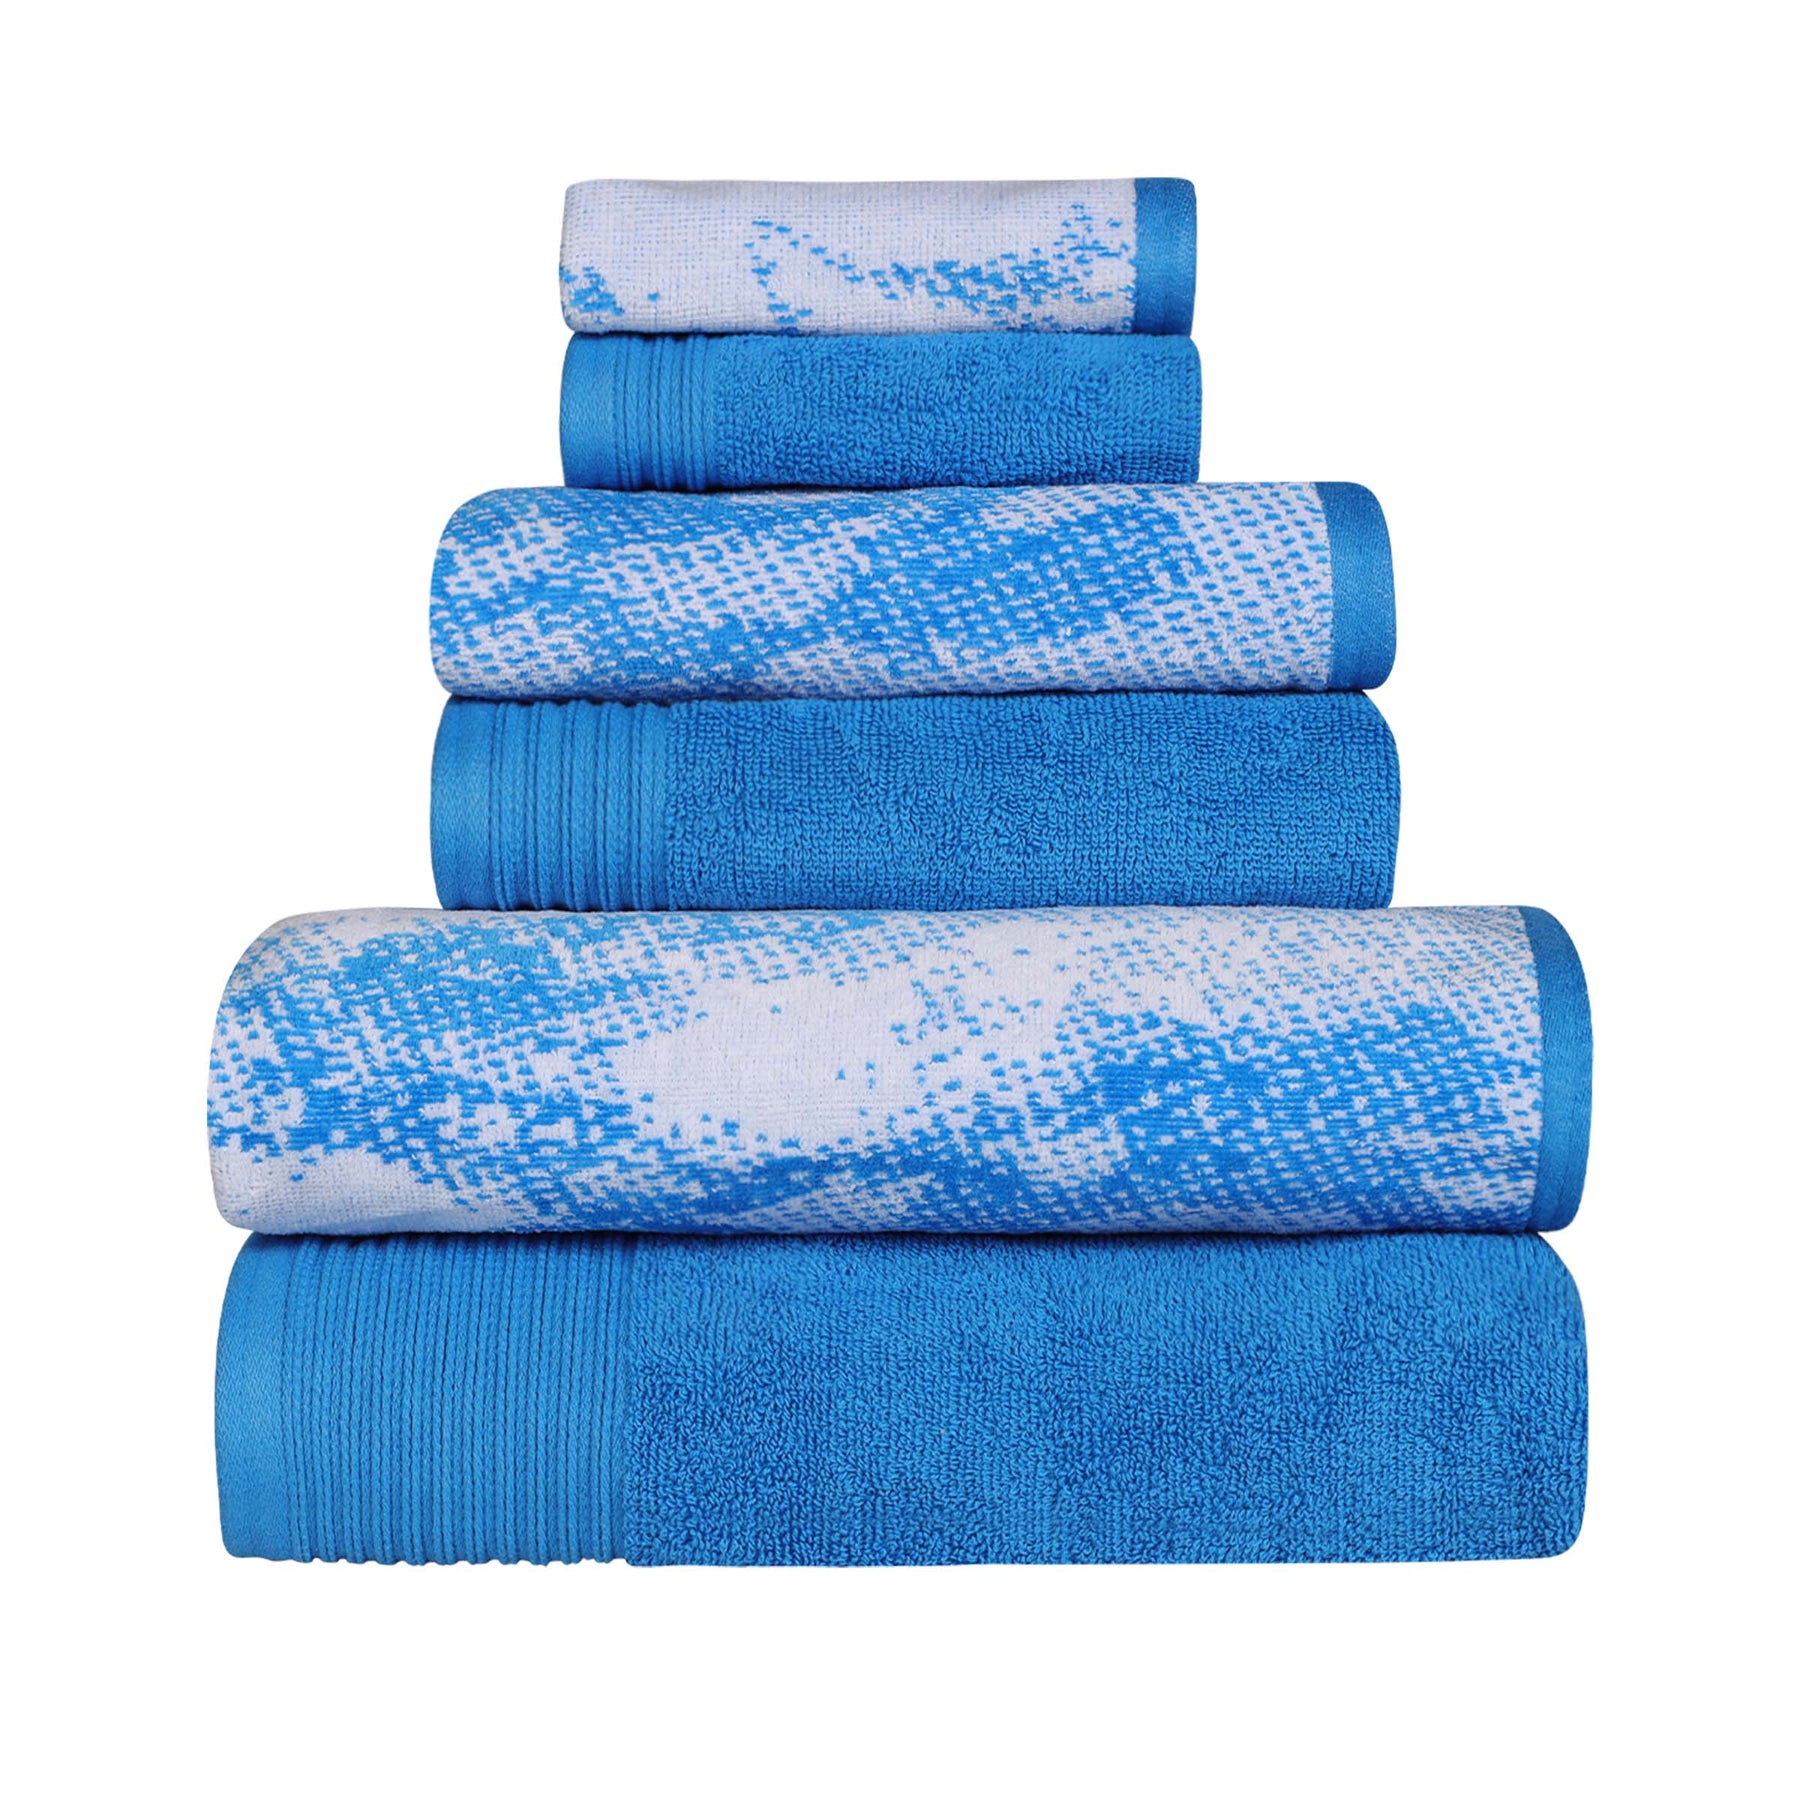 Cotton Marble and Solid Quick Dry 6 Piece Assorted Bathroom Towel Set